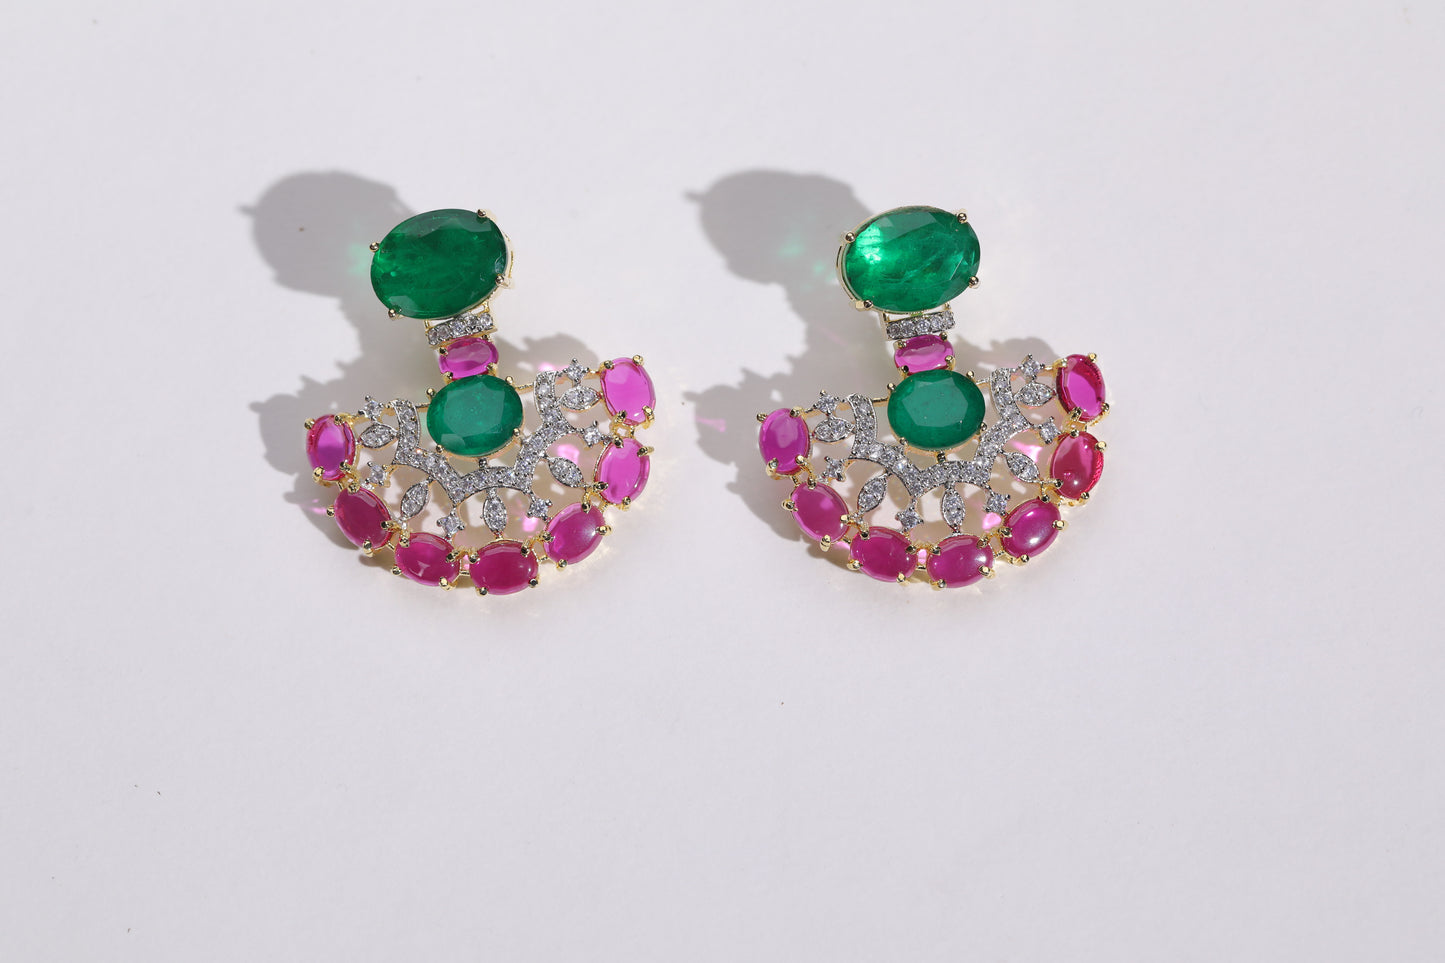 Versatile and Stylish Accessories: Add a touch of glamour to any outfit with our stunning earrings." "Fashion-Forward Earrings: Stand out from the crowd with our unique emerald and pink stone earrings